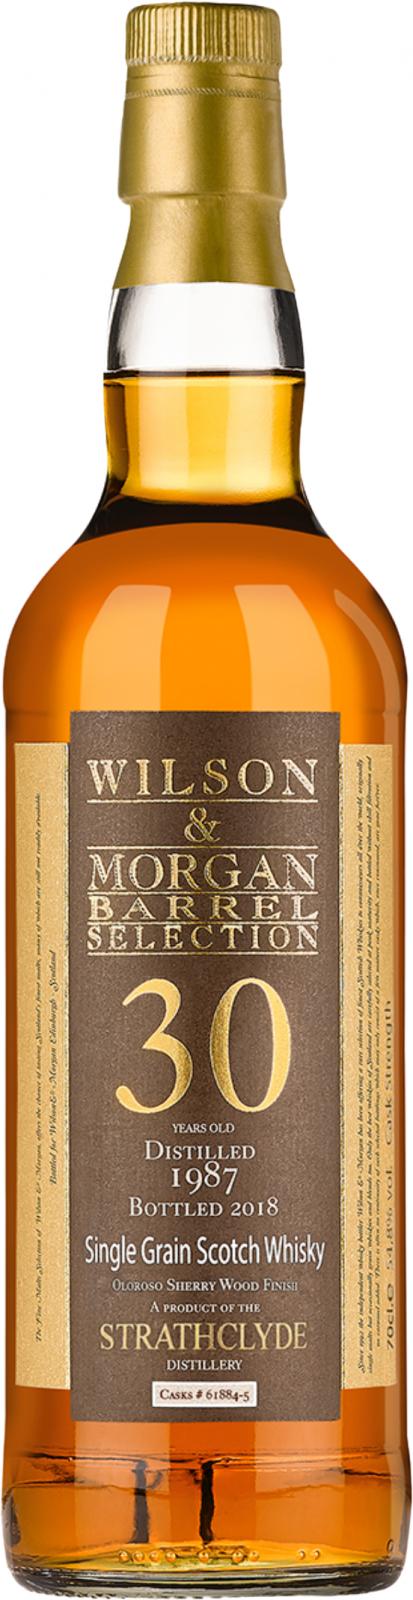 Strathclyde 1987 WM Barrel Selection Special Release Oloroso Sherry Wood Finish 61884 61885 54.8% 700ml